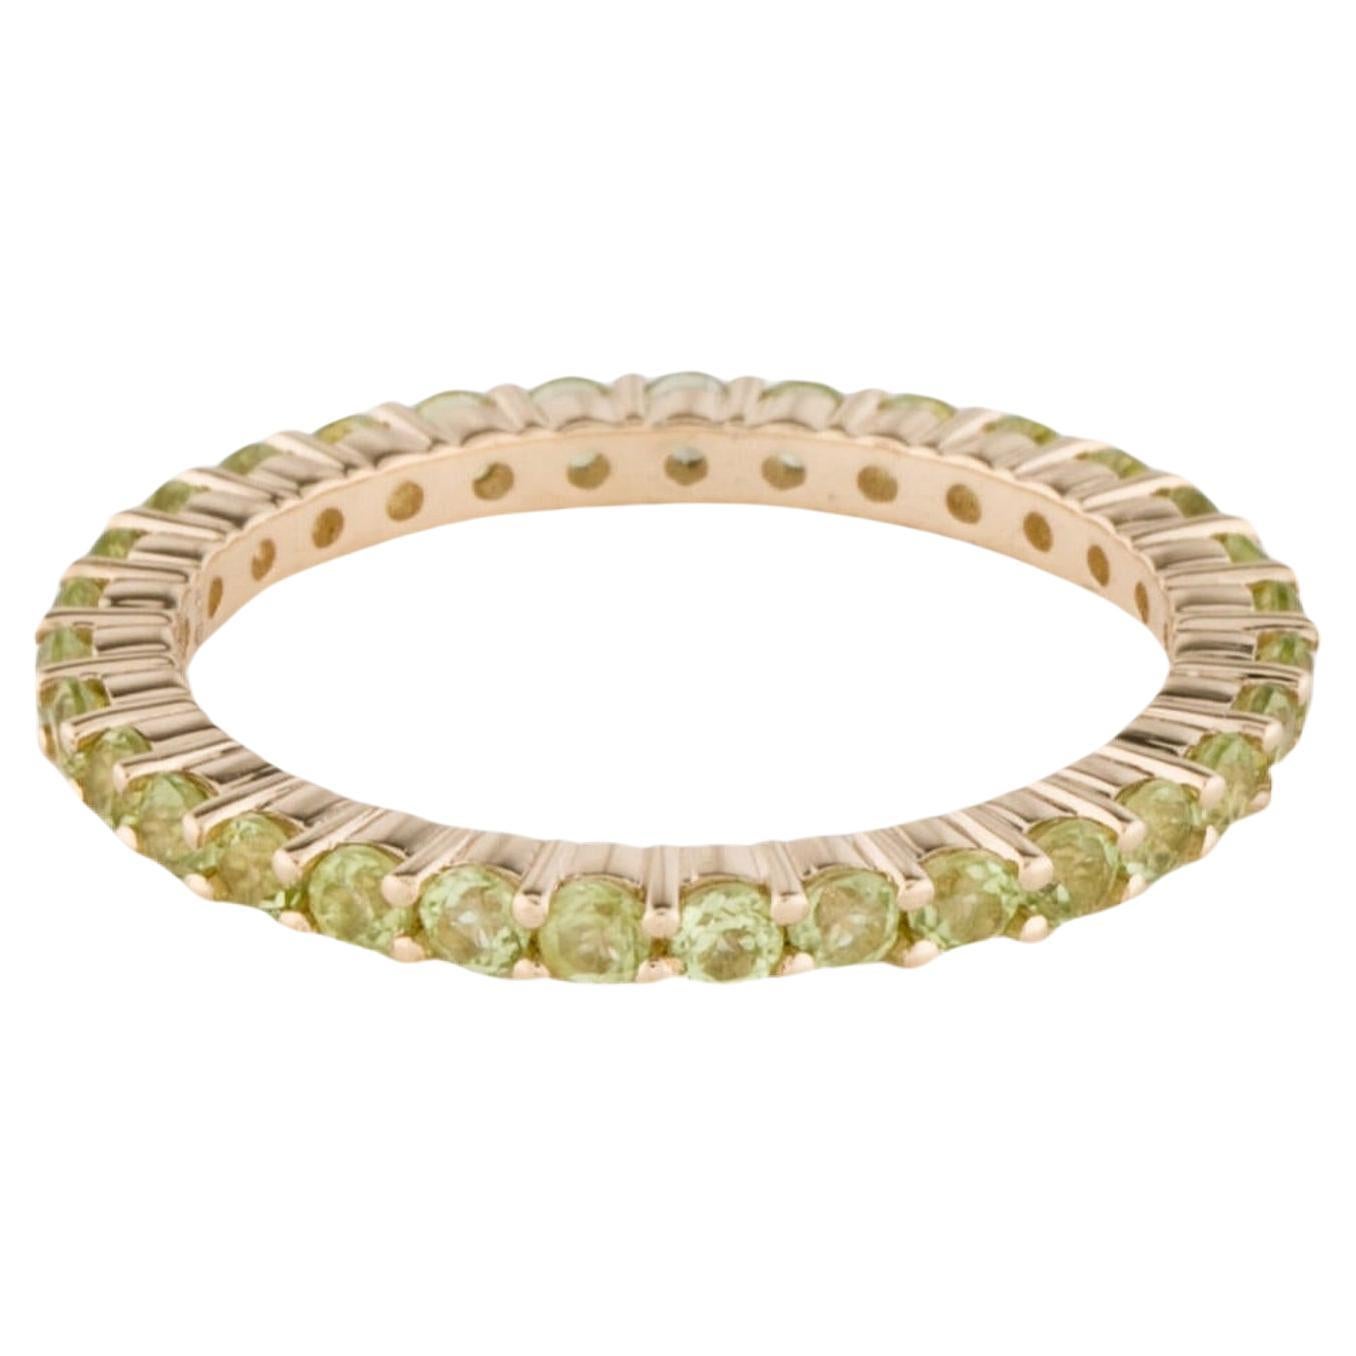 Chic 14K Peridot Eternity Band Ring, Size 7 - Timeless Statement Jewelry Piece For Sale